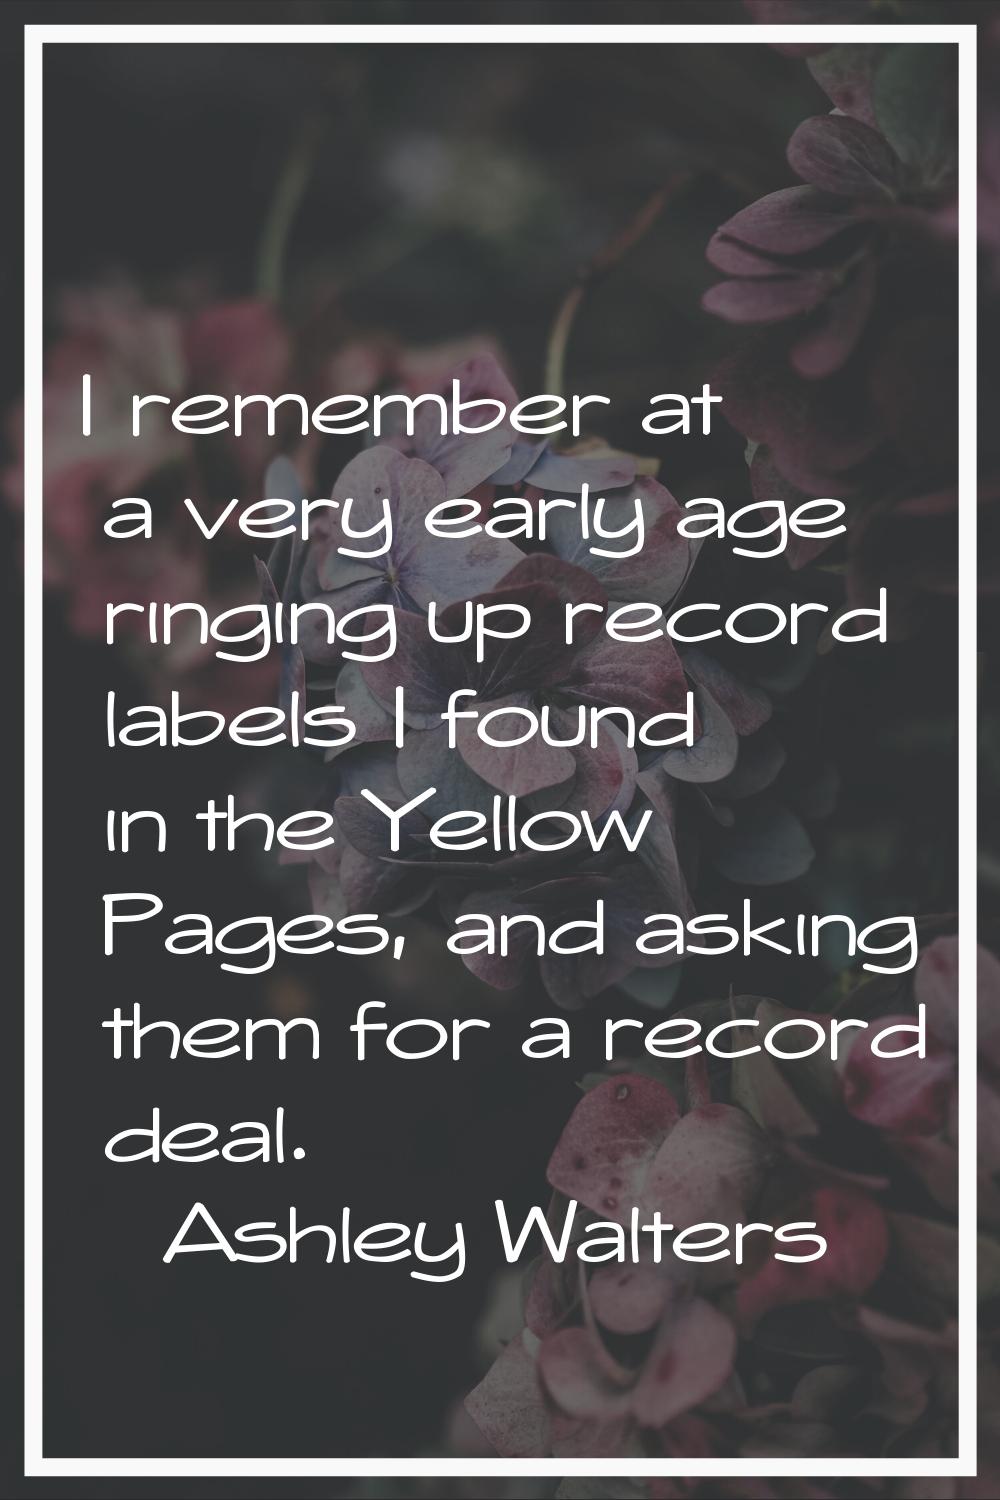 I remember at a very early age ringing up record labels I found in the Yellow Pages, and asking the